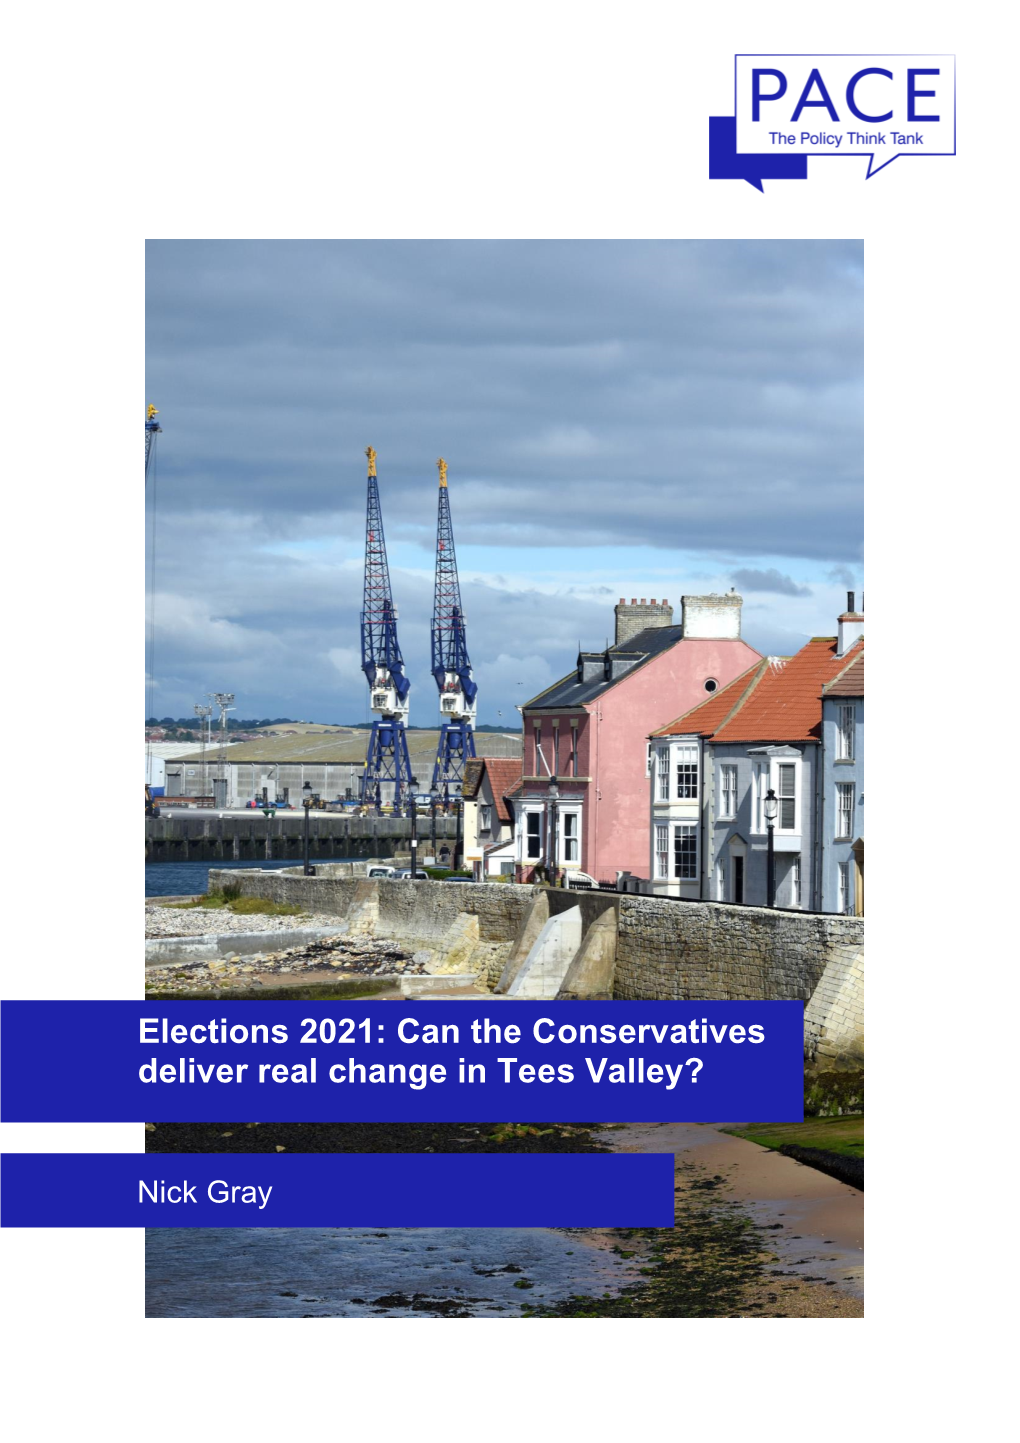 Elections 2021: Can the Conservatives Deliver Real Change in Tees Valley?